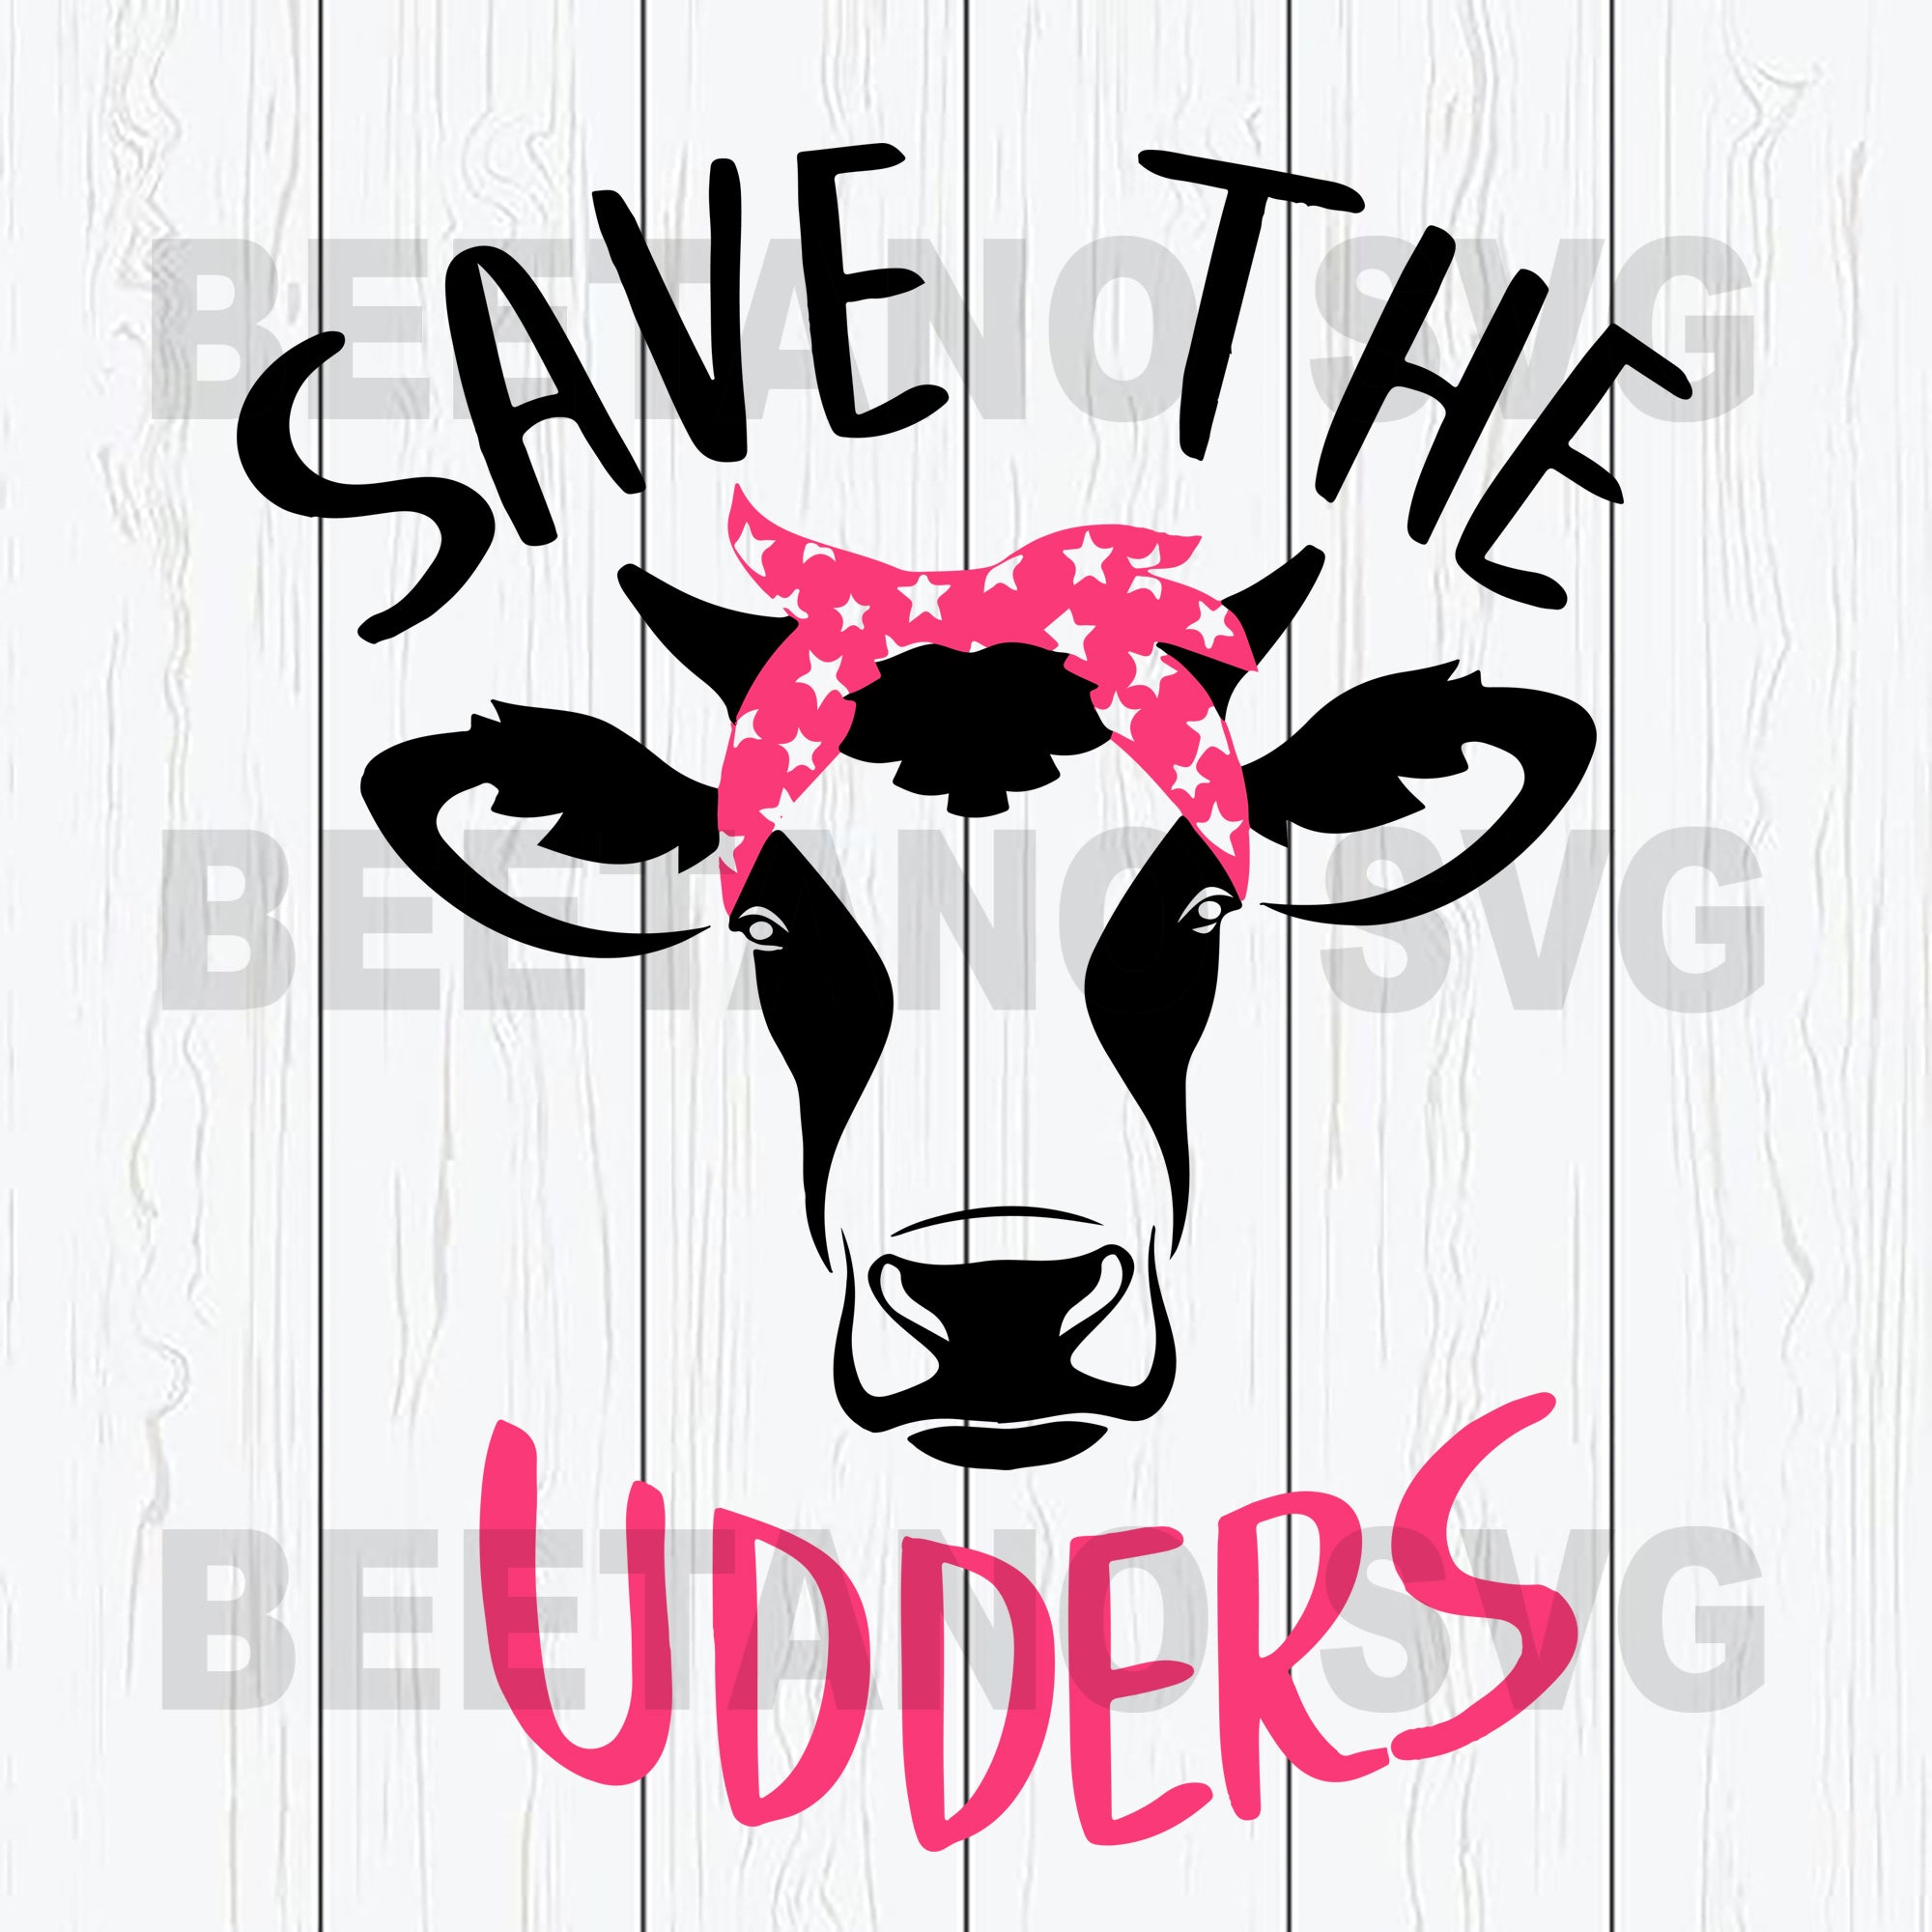 Download Save The Udders Mama Cow Svg Files Heifei Svg Files For Instant Downl